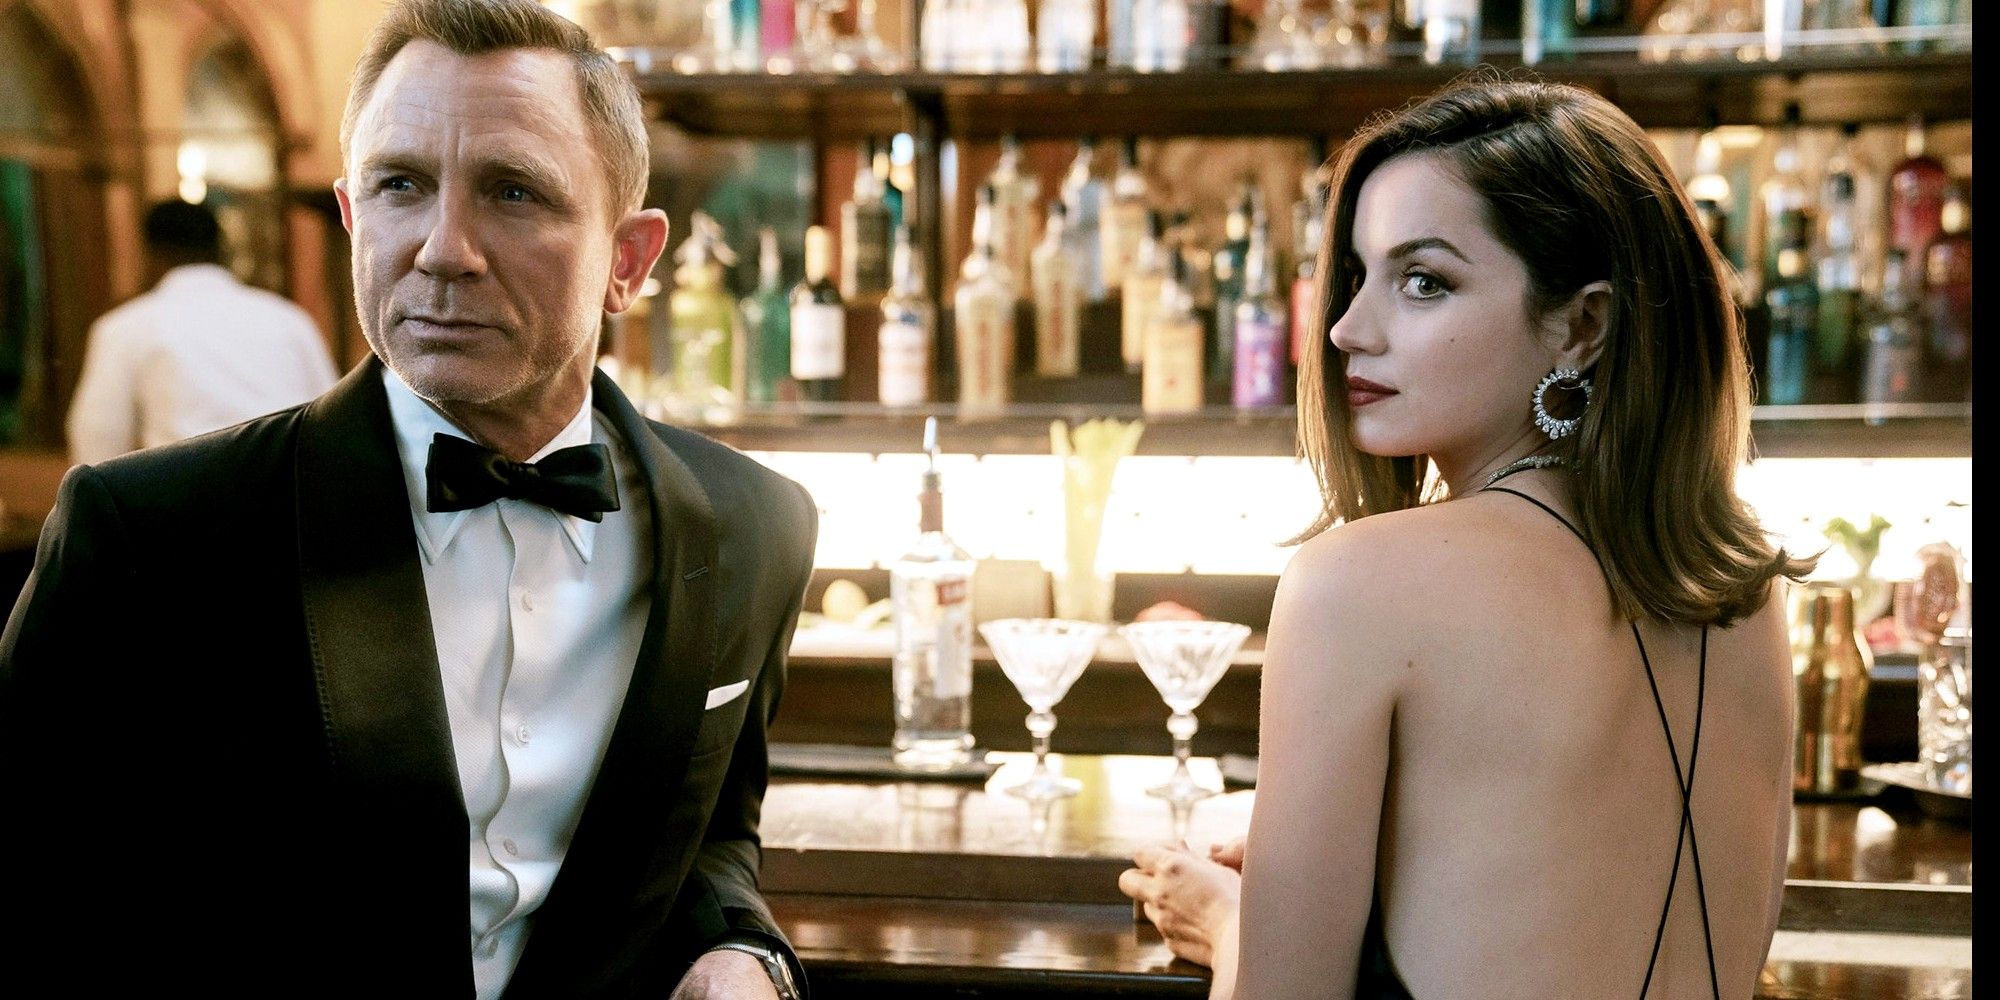 Daniel Craig as James Bond and Ana de Armas as Paloma in No Time to Die